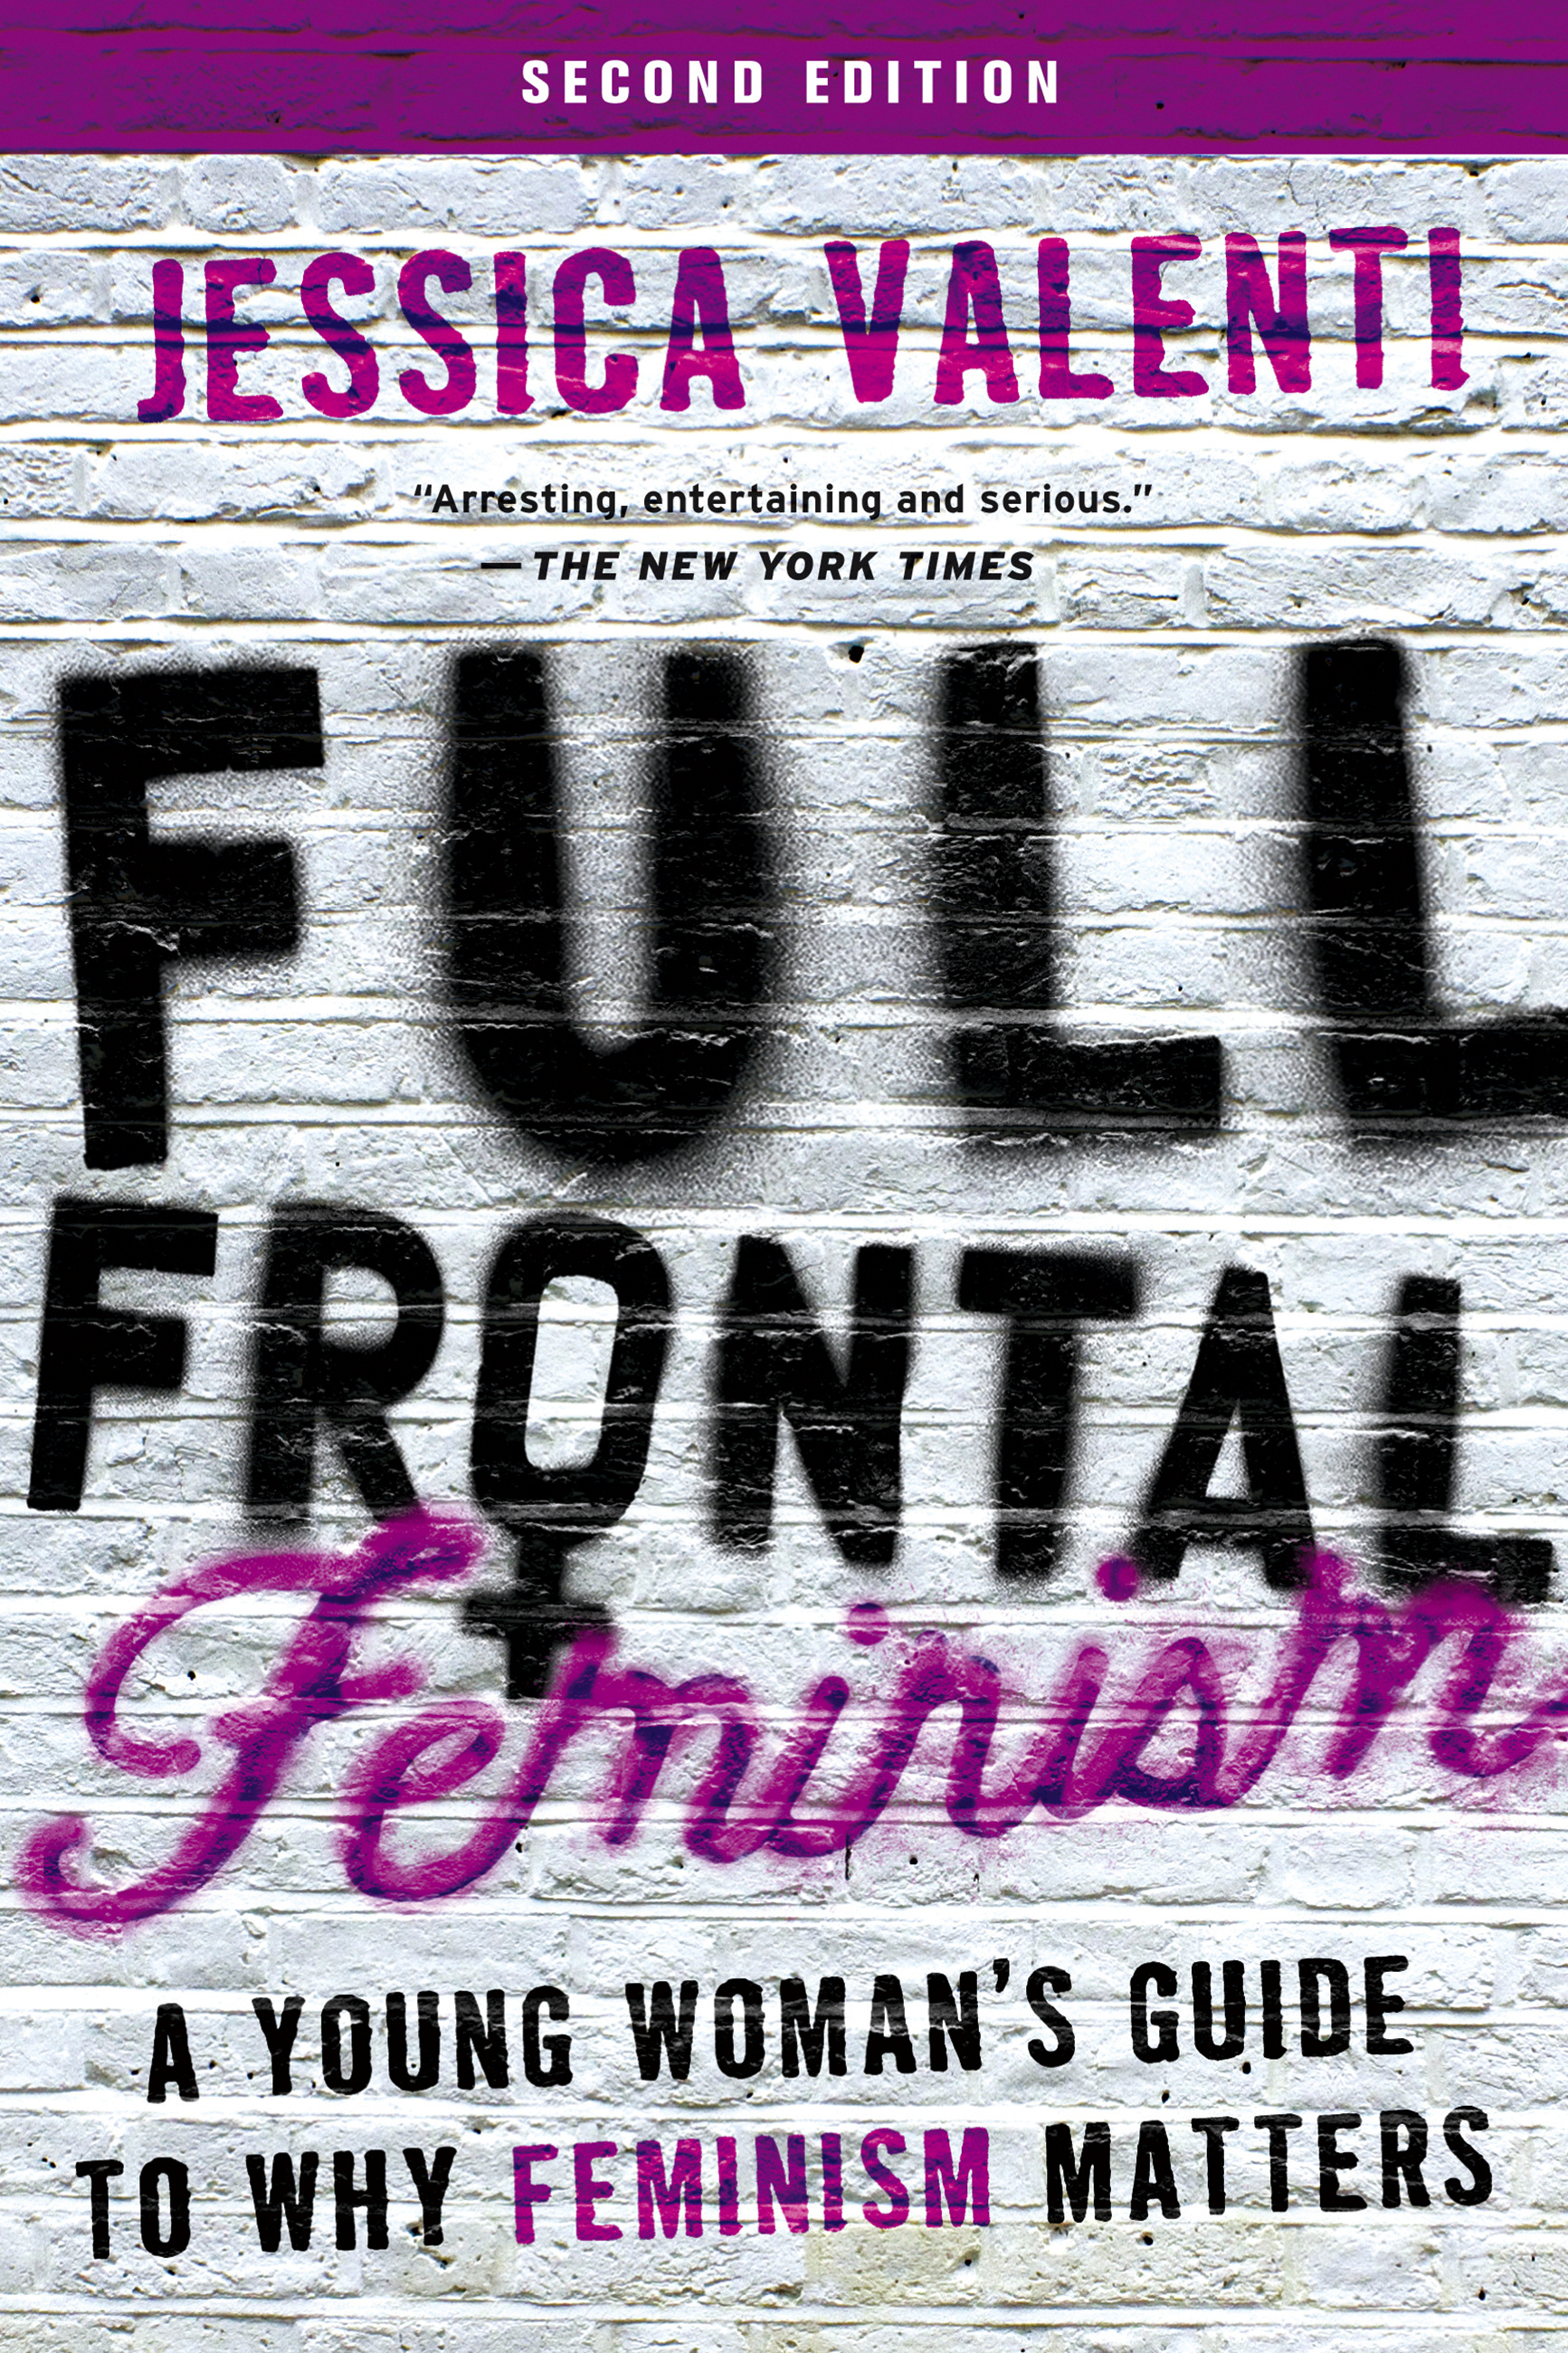 Pregnant Hairy Pussy Passed Out - Full Frontal Feminism by Jessica Valenti | Hachette Book Group